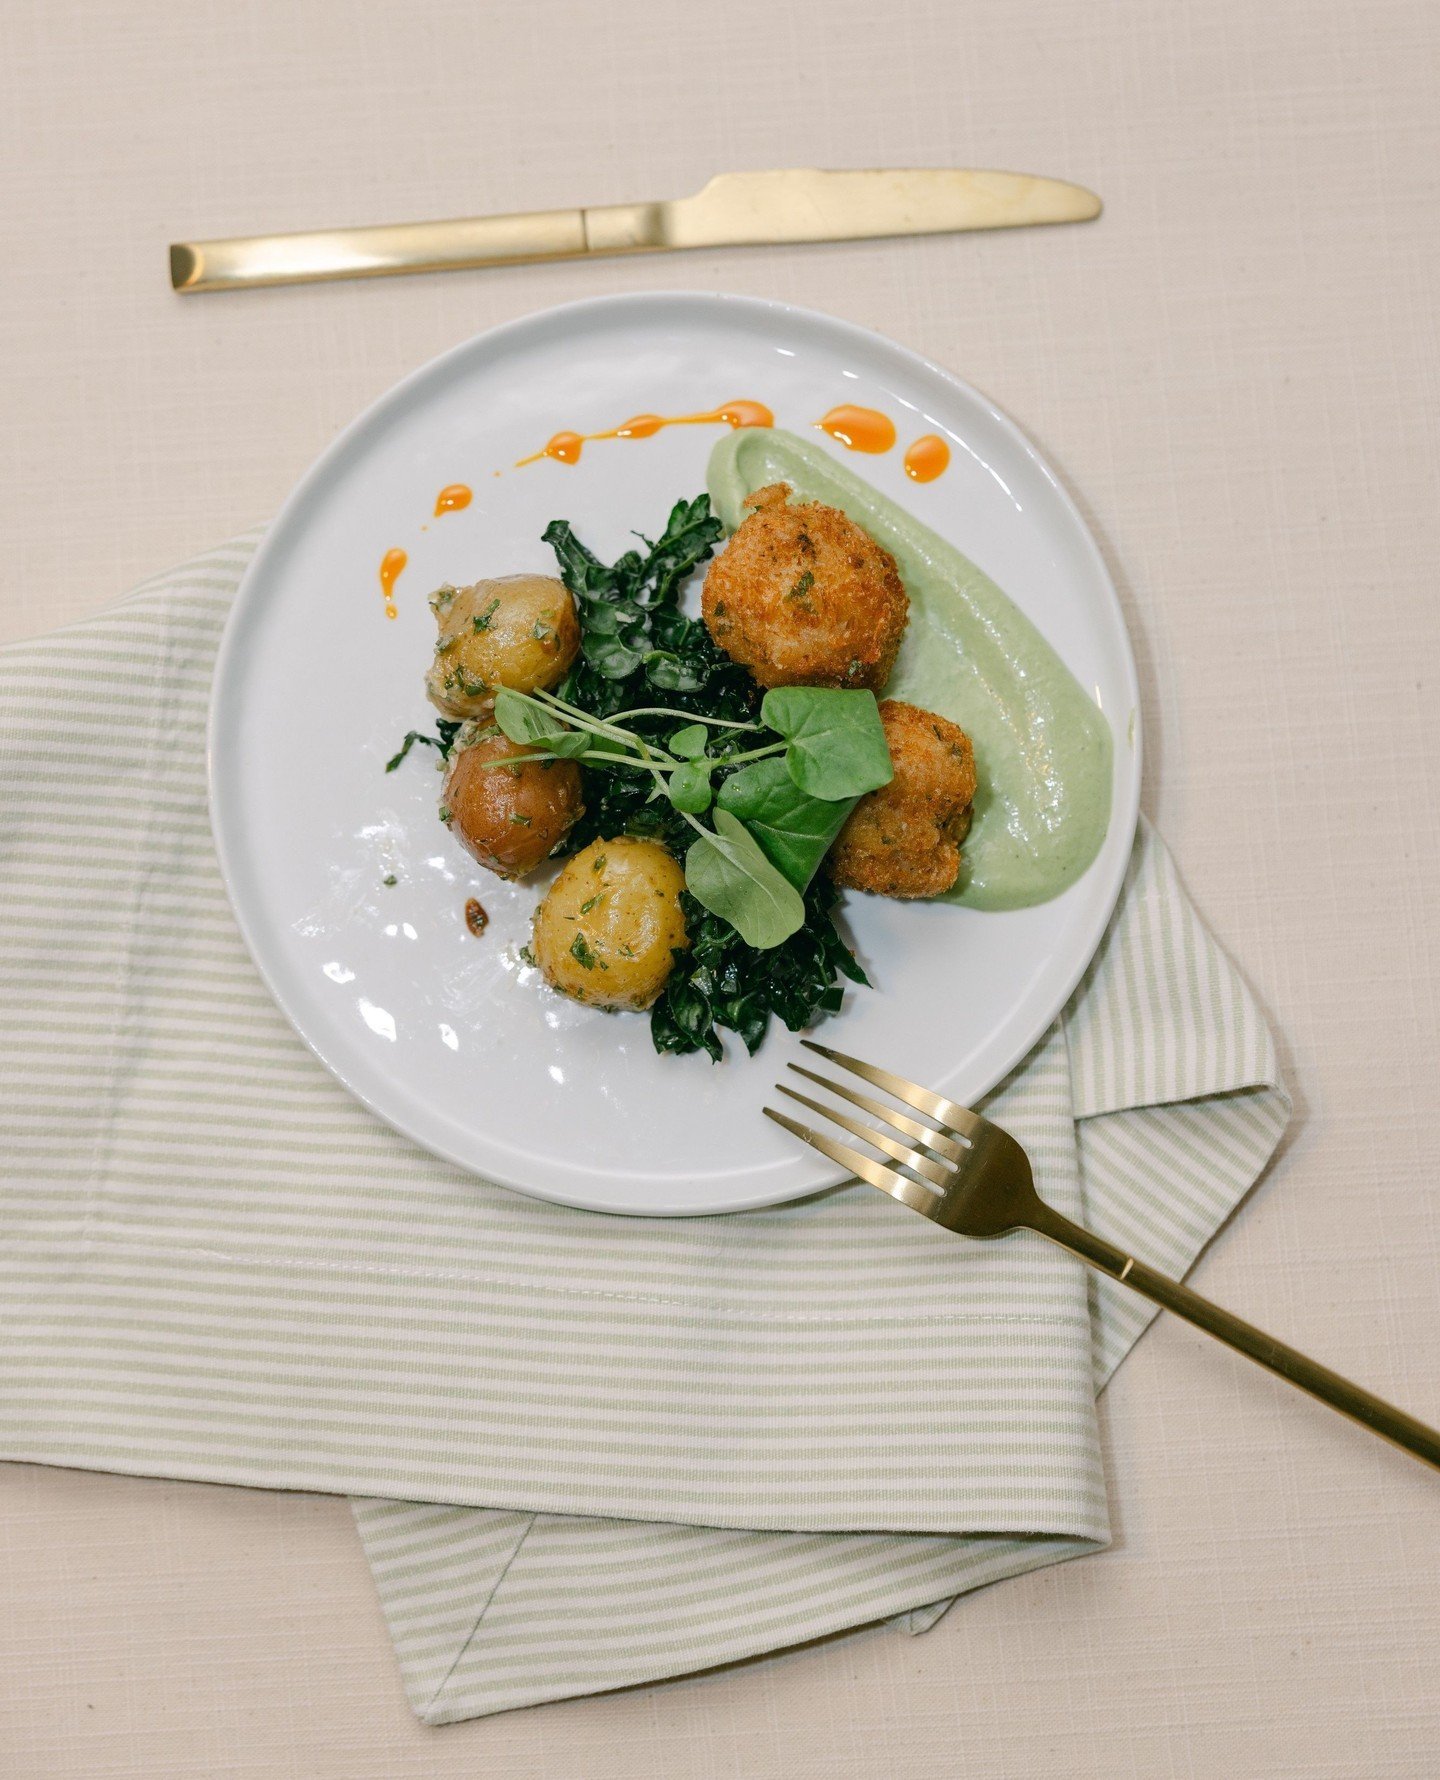 Our Mock Fried Chicken is the perfect dish to accommodate your vegan and gluten-free guests! ✨️ Crispy cauliflower wedges, perfectly complemented by vegan green goddess dressing, served with a warm fingerling potato salad with baby kale, cress, and m